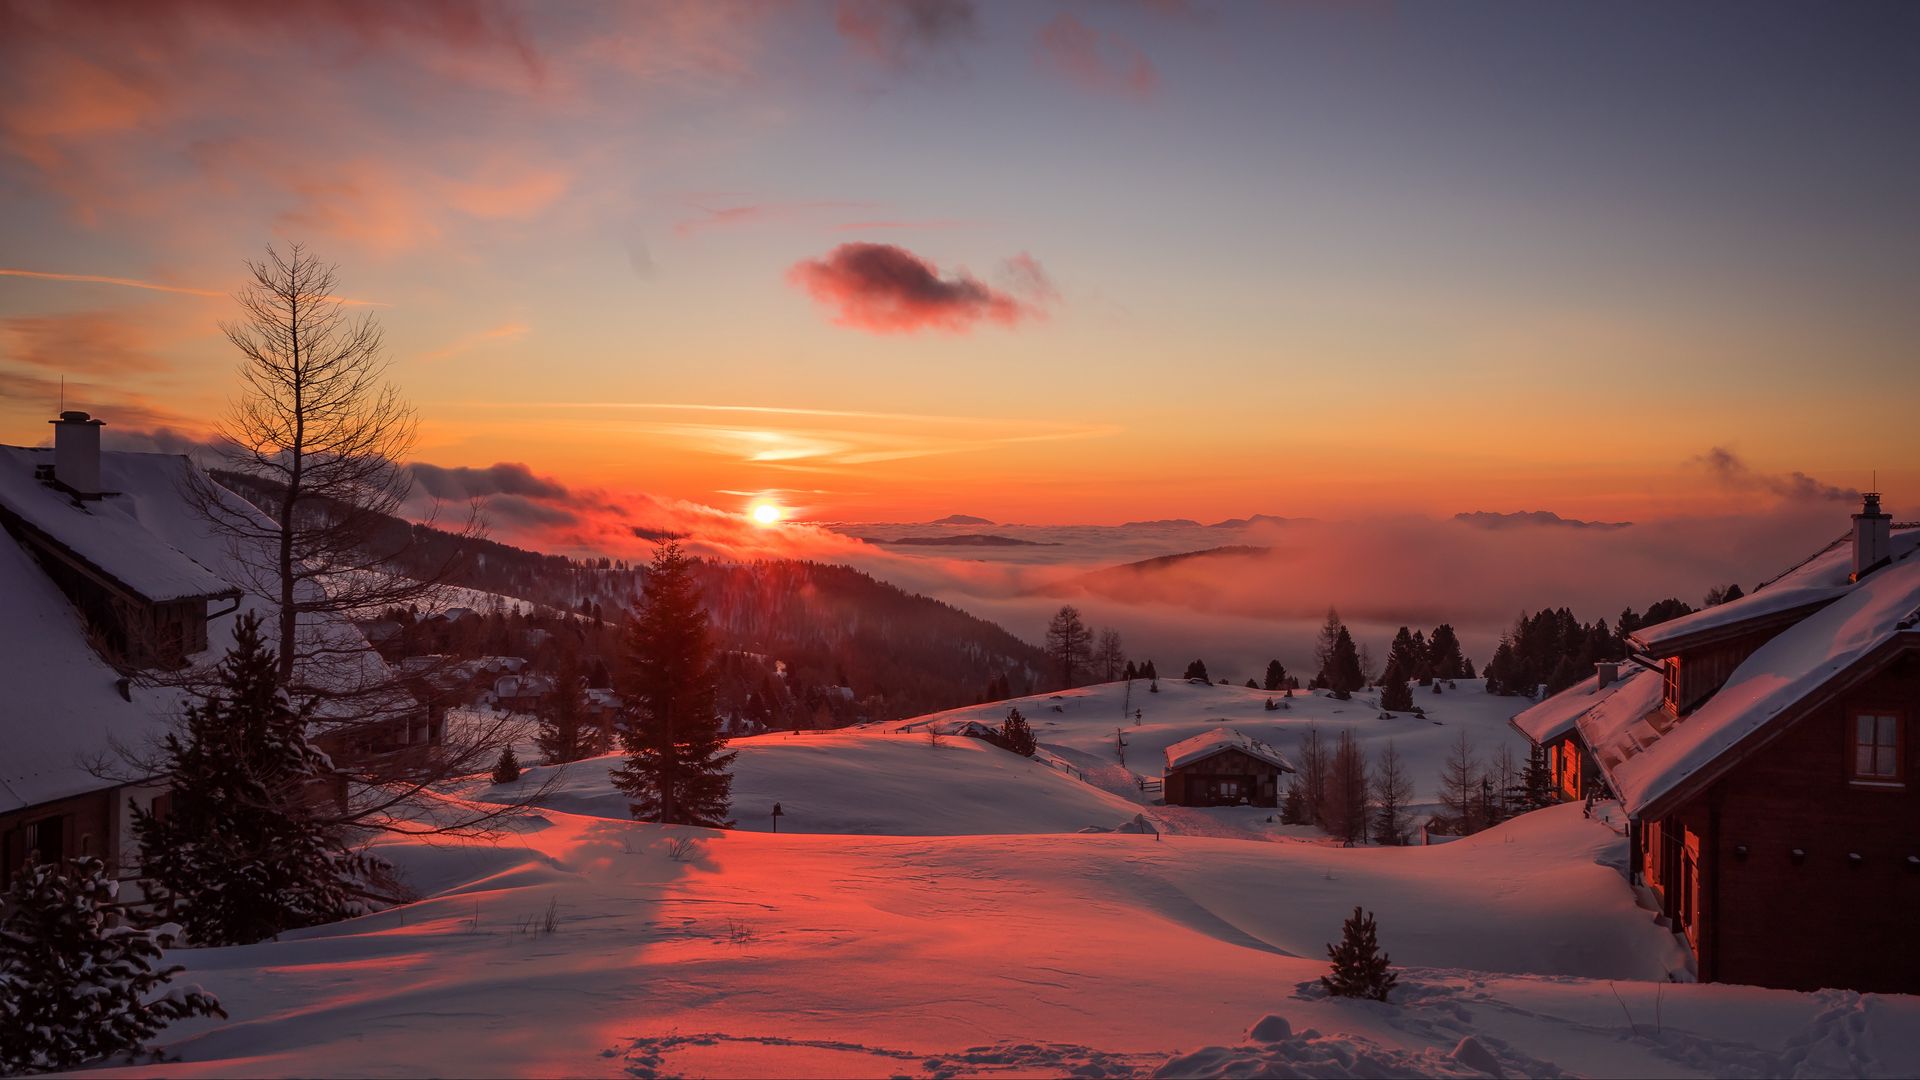 Download wallpaper 1920x1080 mountains, winter, sunset, trees, austria full hd, hdtv, fhd, 1080p HD background